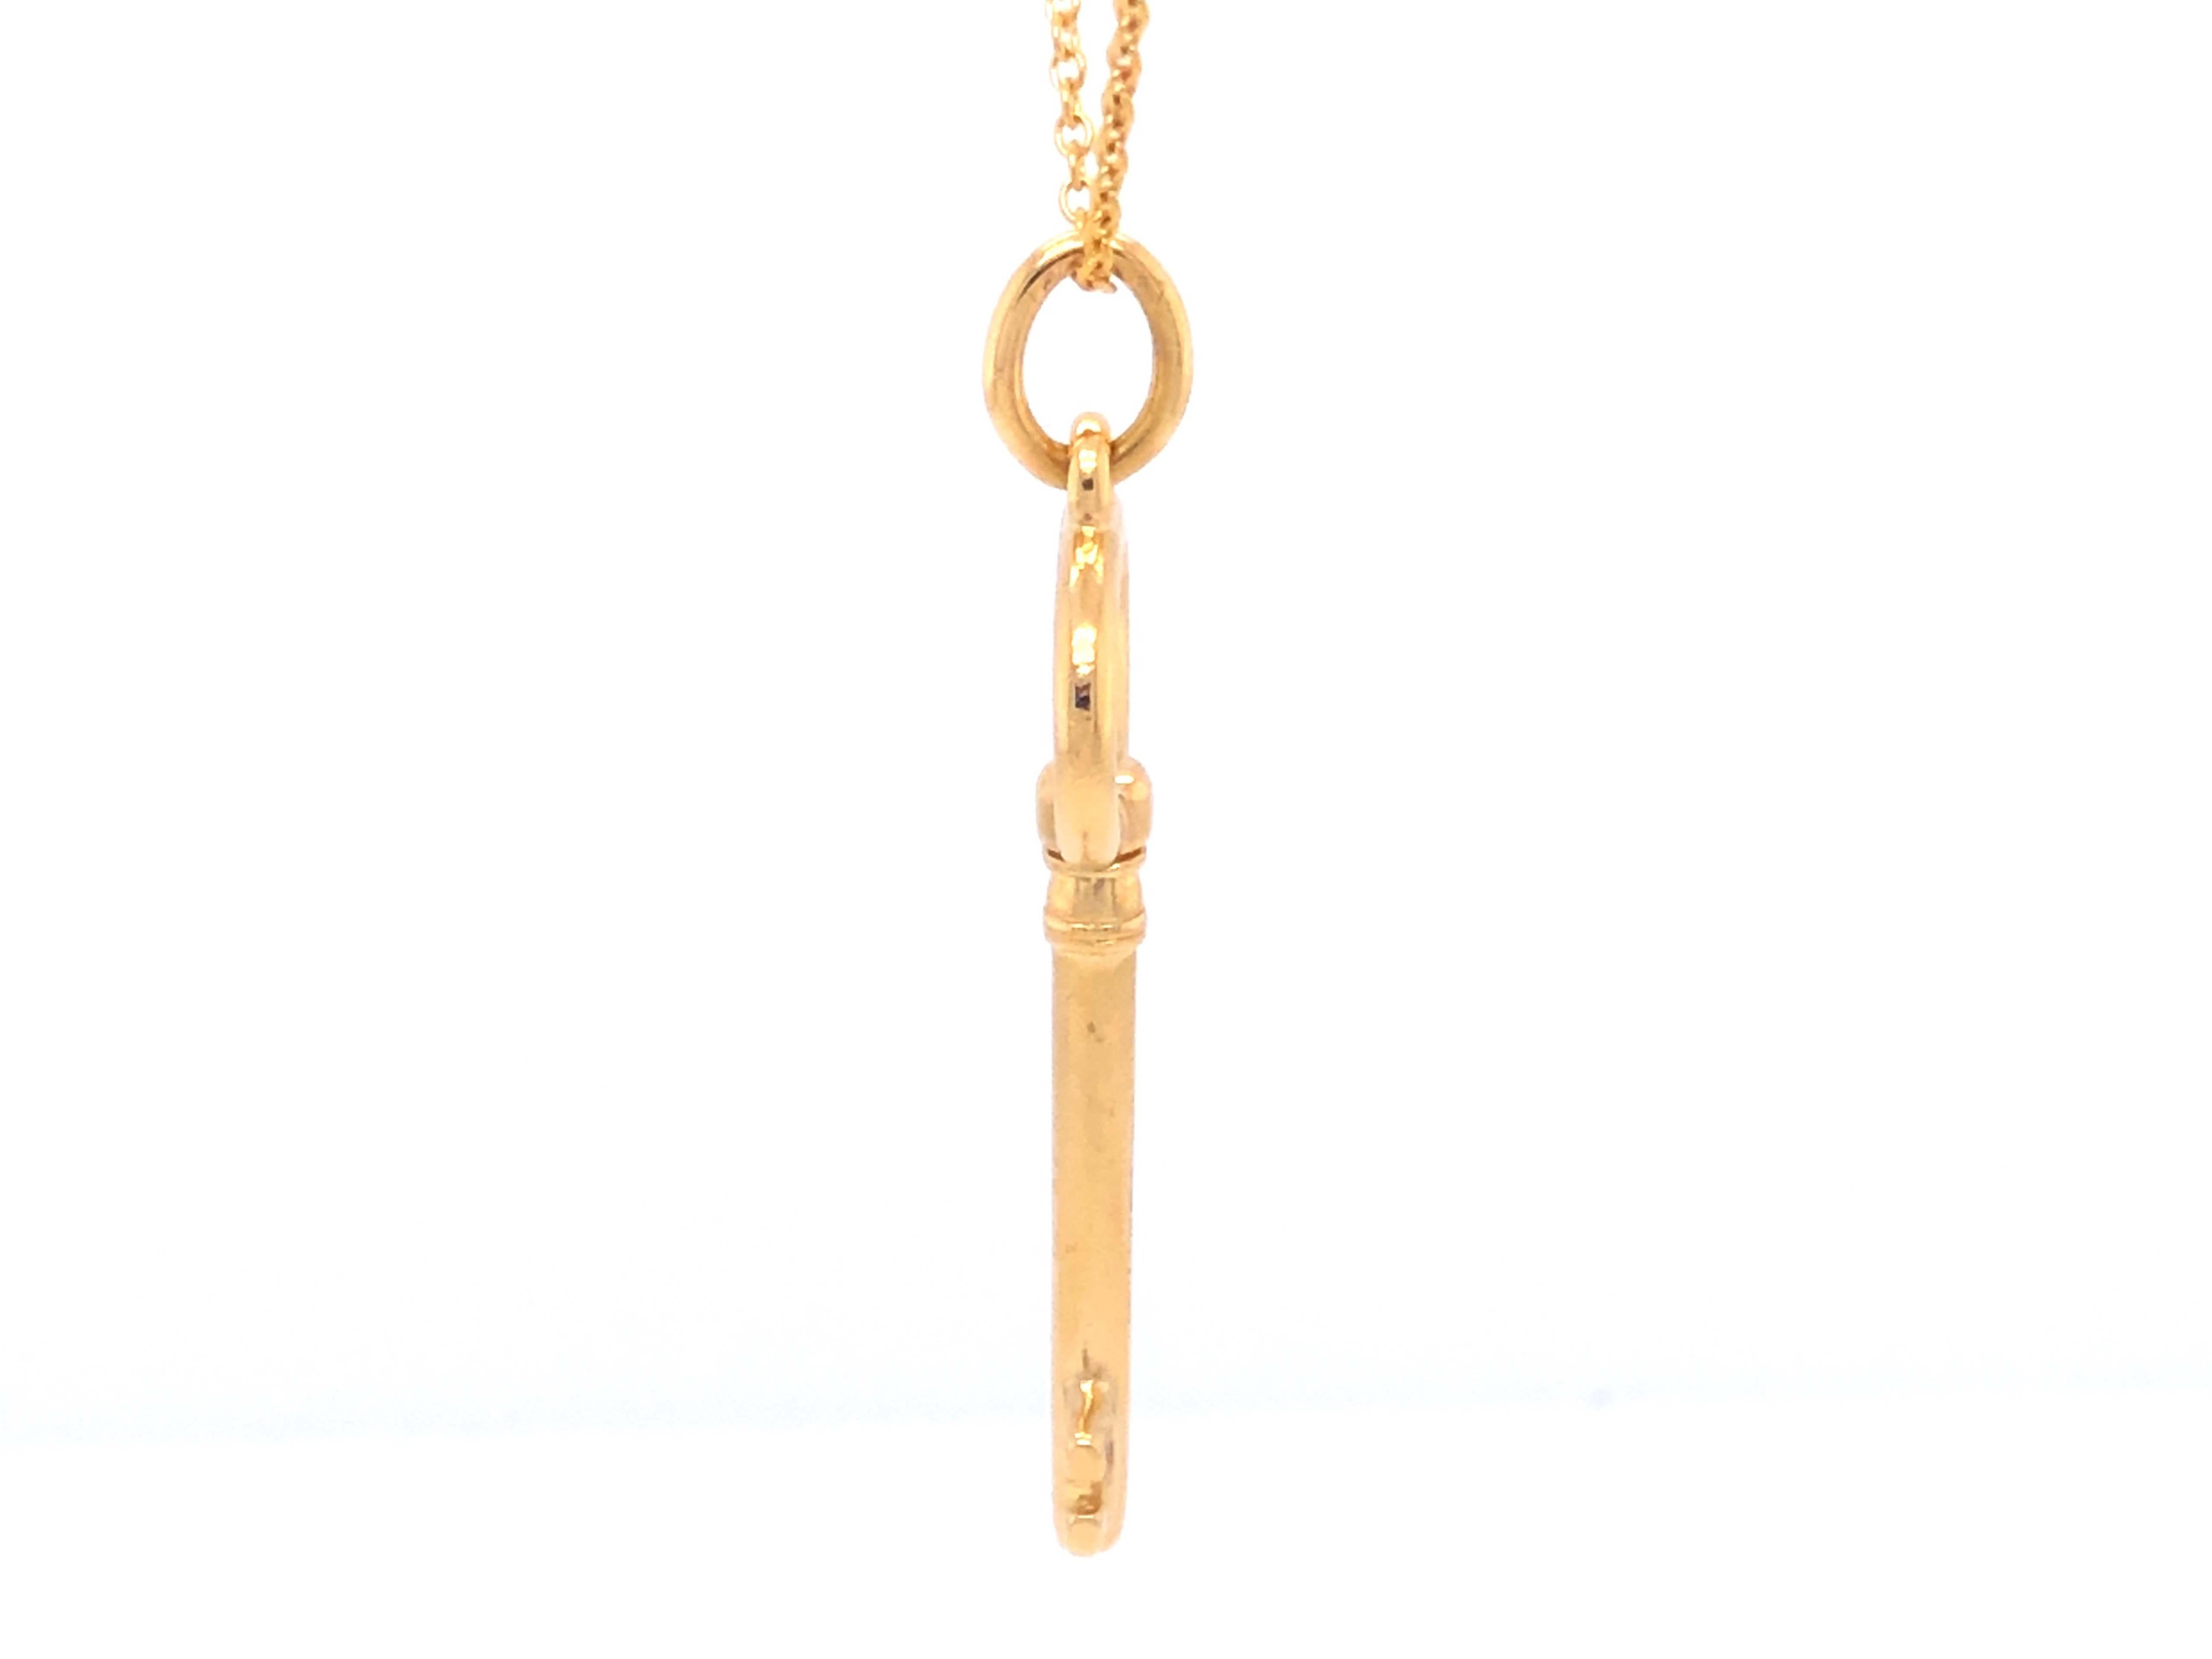 Tiffany & Co. Oval Key Pendant and Chain, 18k Yellow Gold 1